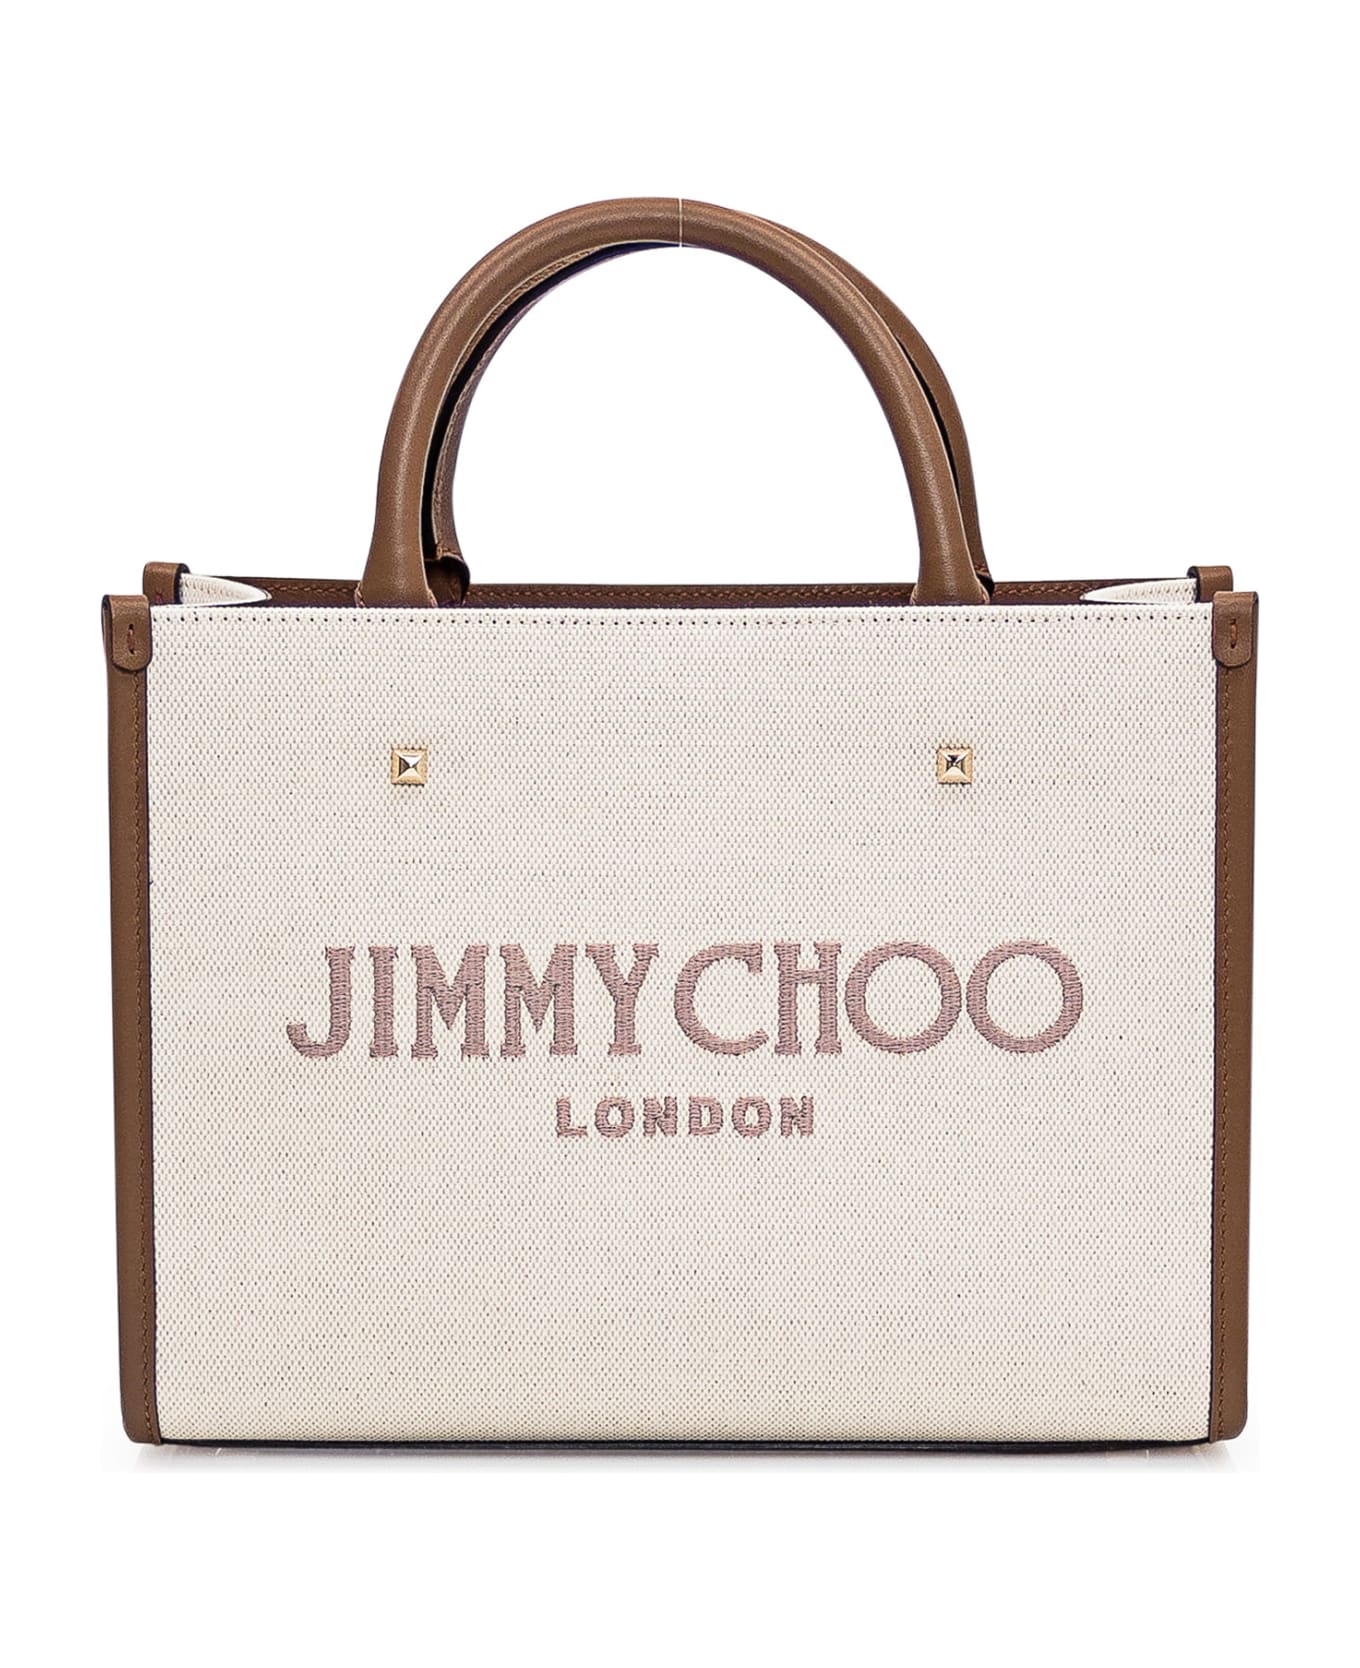 Jimmy Choo Avenue S Tote Bag - NATURAL/TAUPE/DARK TAN/LIGHT GOLD トートバッグ